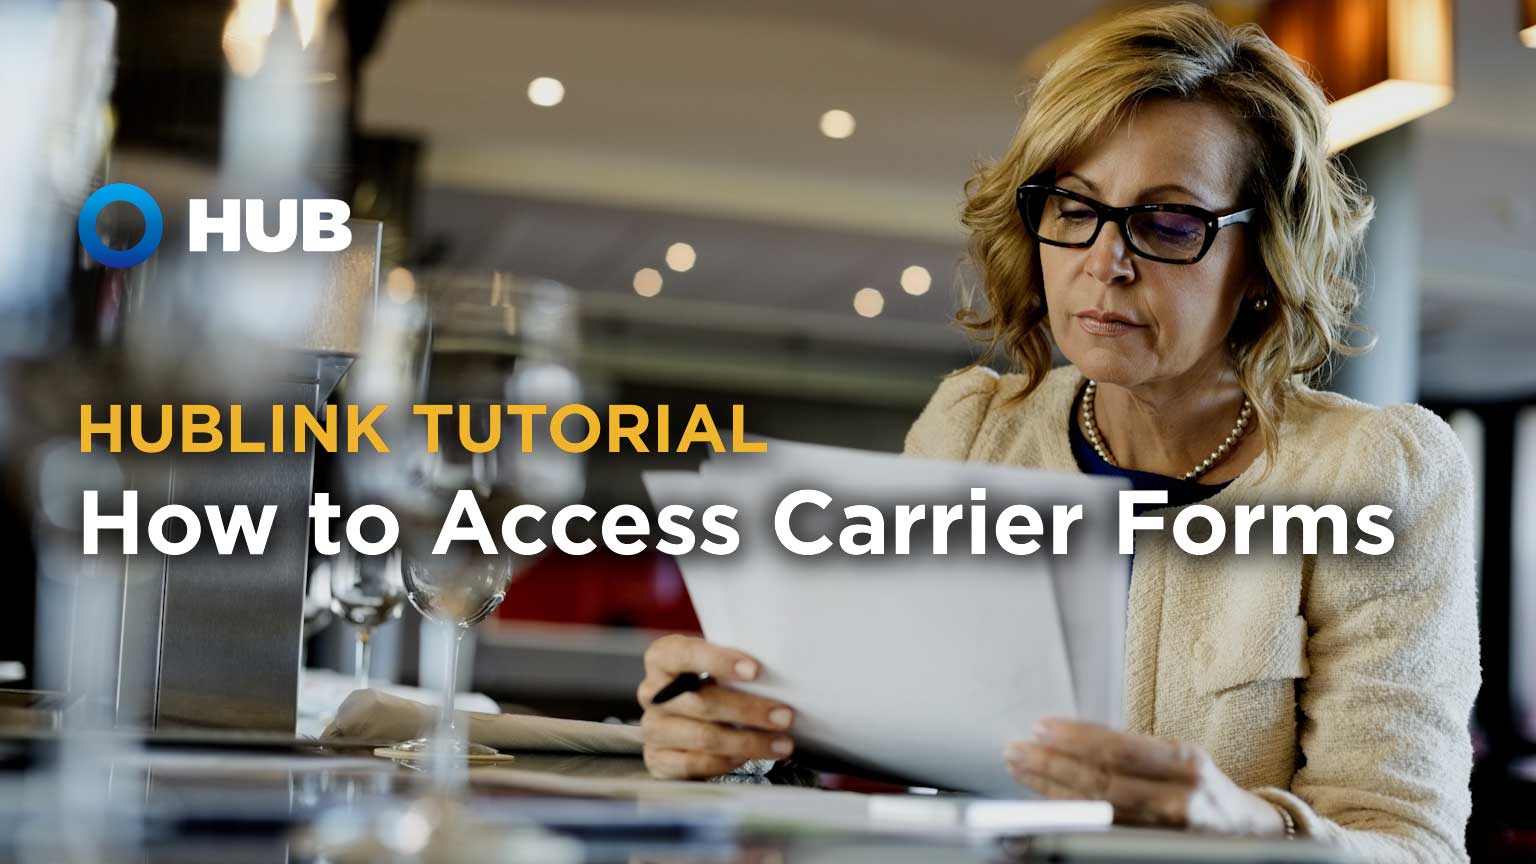 How-to-Access-Carrier-Forms-on-HUBLink